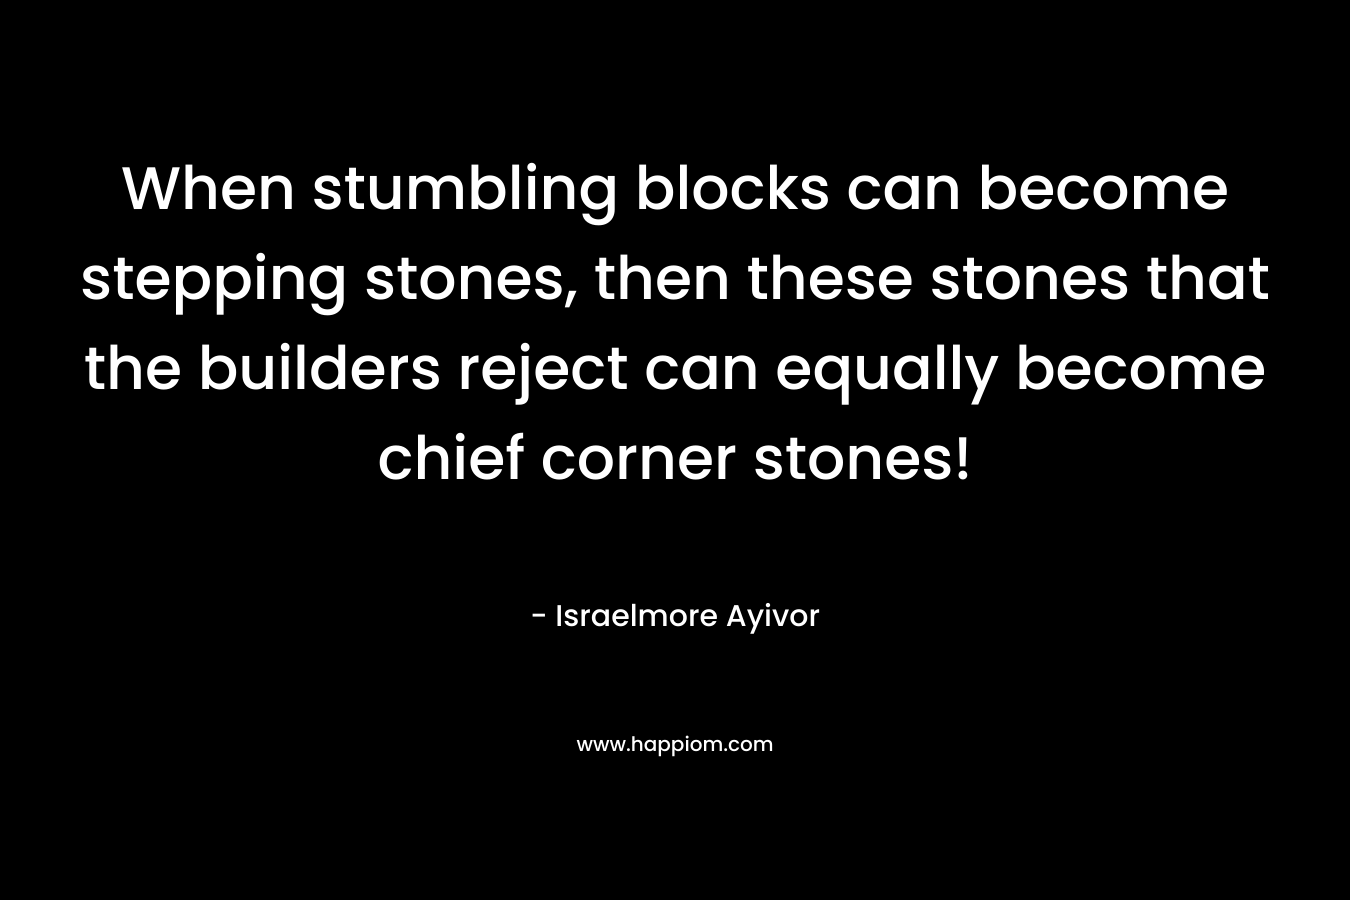 When stumbling blocks can become stepping stones, then these stones that the builders reject can equally become chief corner stones! – Israelmore Ayivor